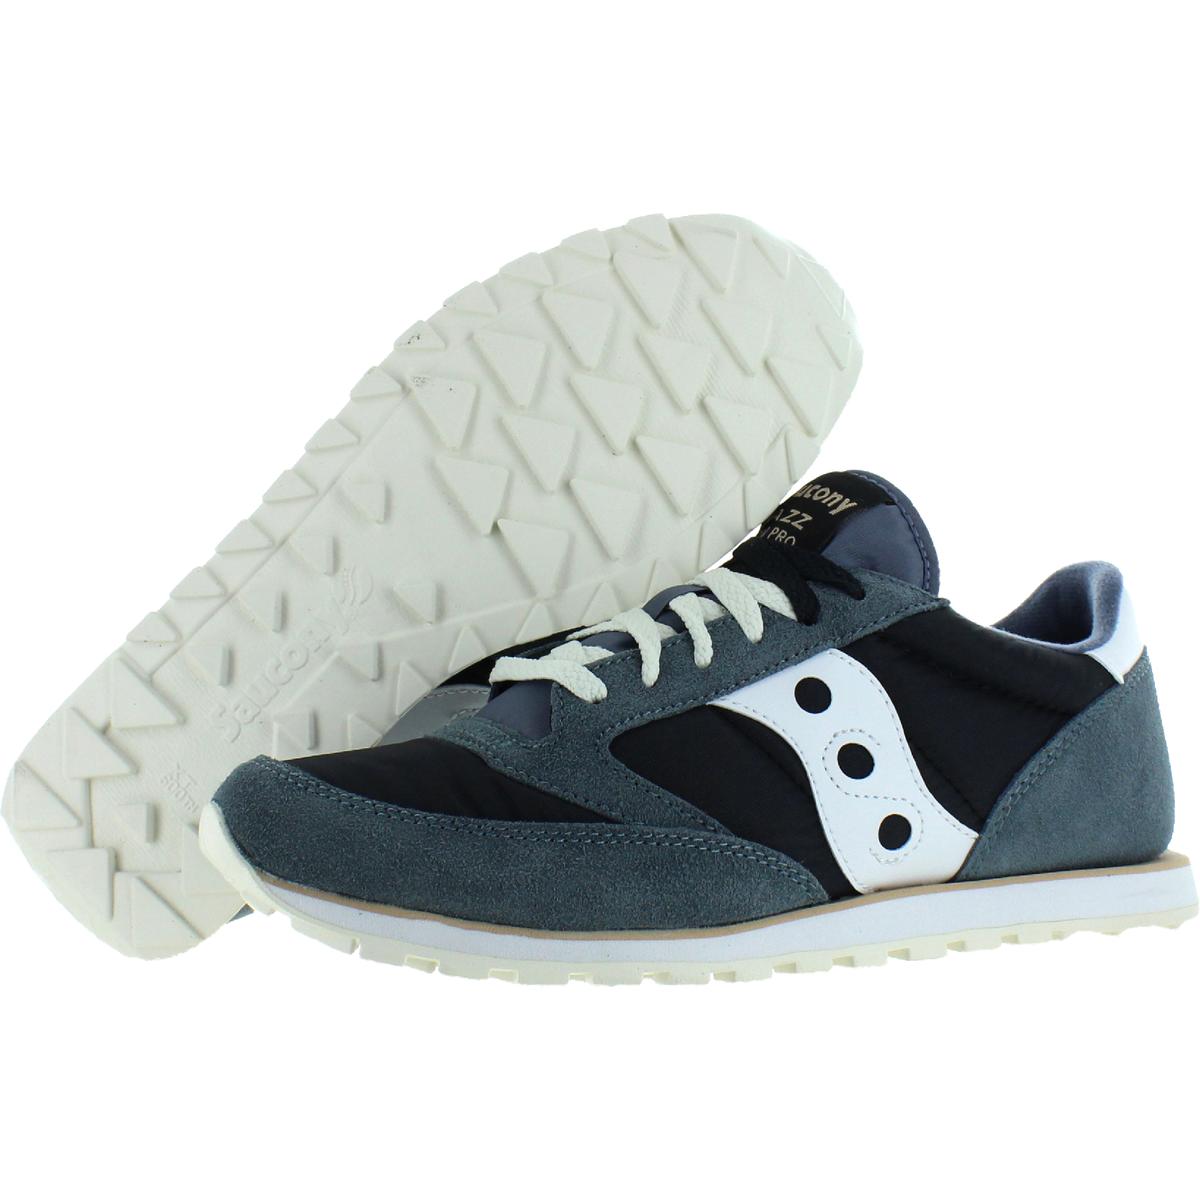 Saucony Mens Jazz Low Pro Suede Trainers Comfort Sneakers Shoes BHFO ...